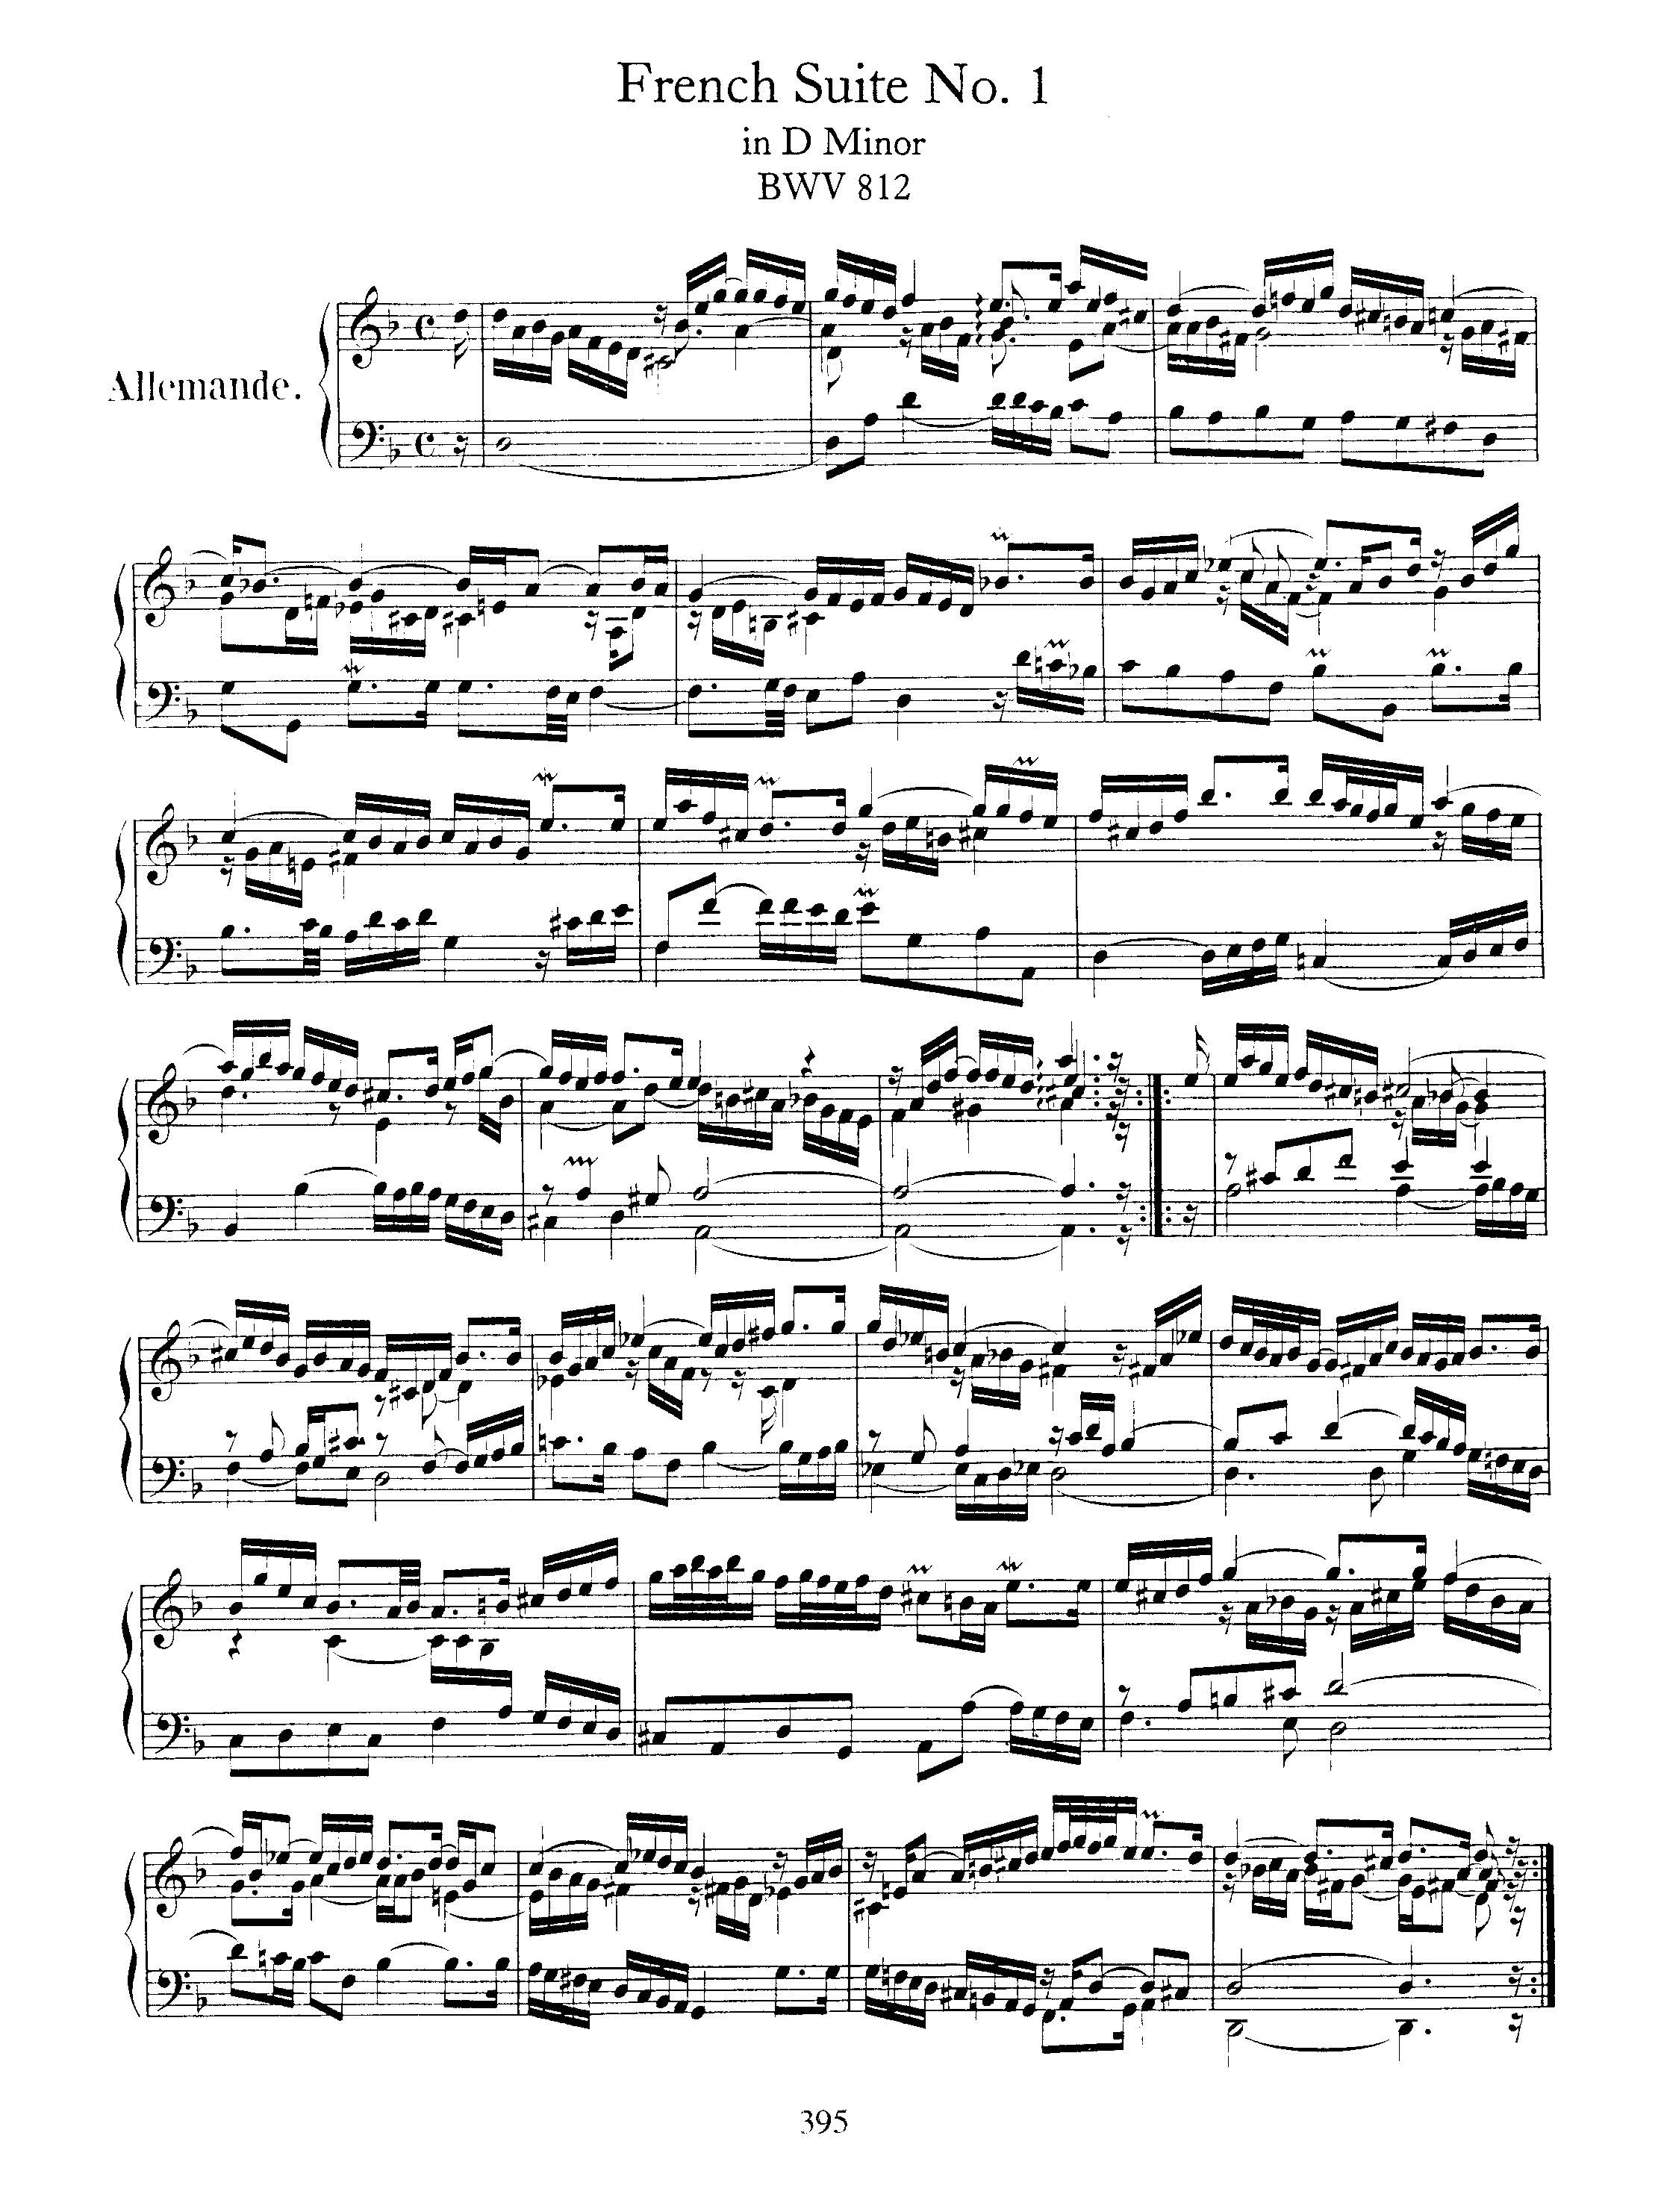 Bach Keyboard Sheet Music for Piano - PageLarge